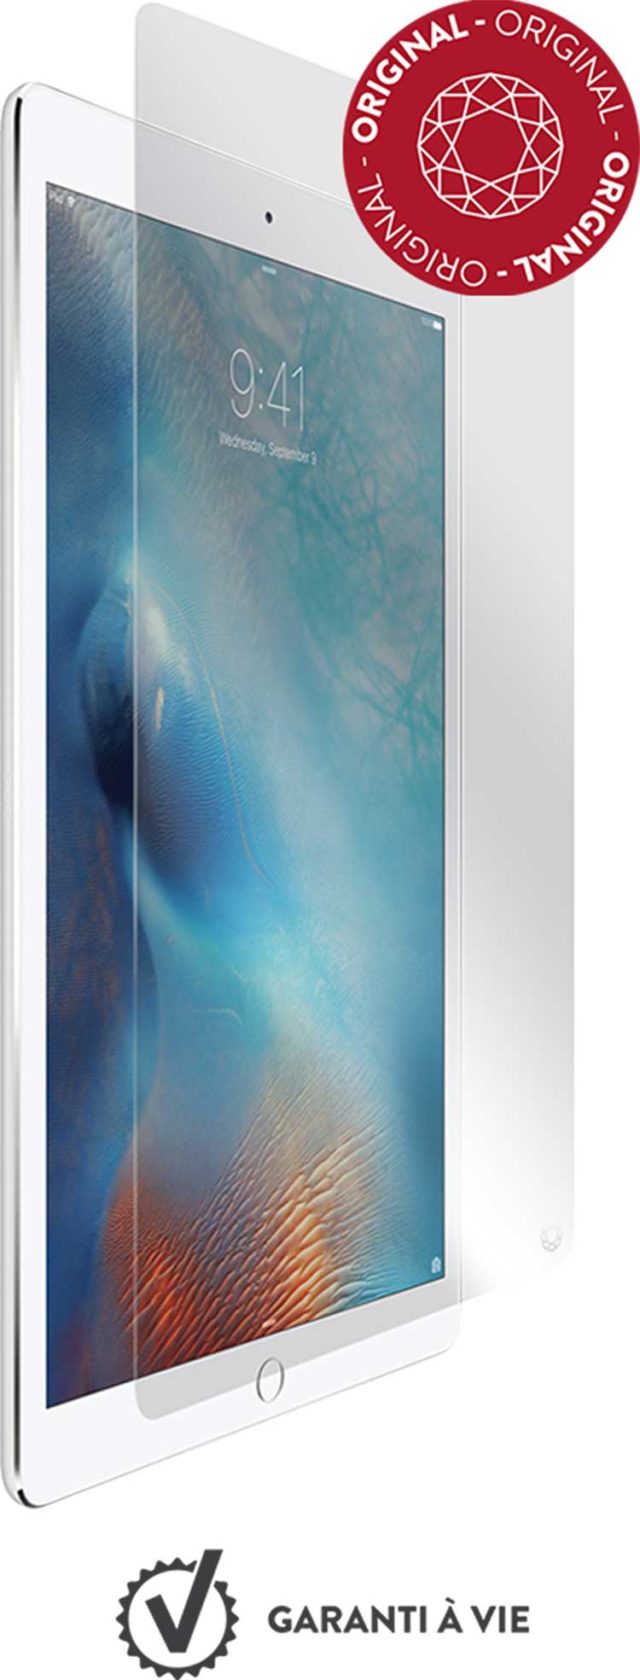 The tempered glass screen protector FORCE GLASS for iPad Pro 12.9 - Packshot